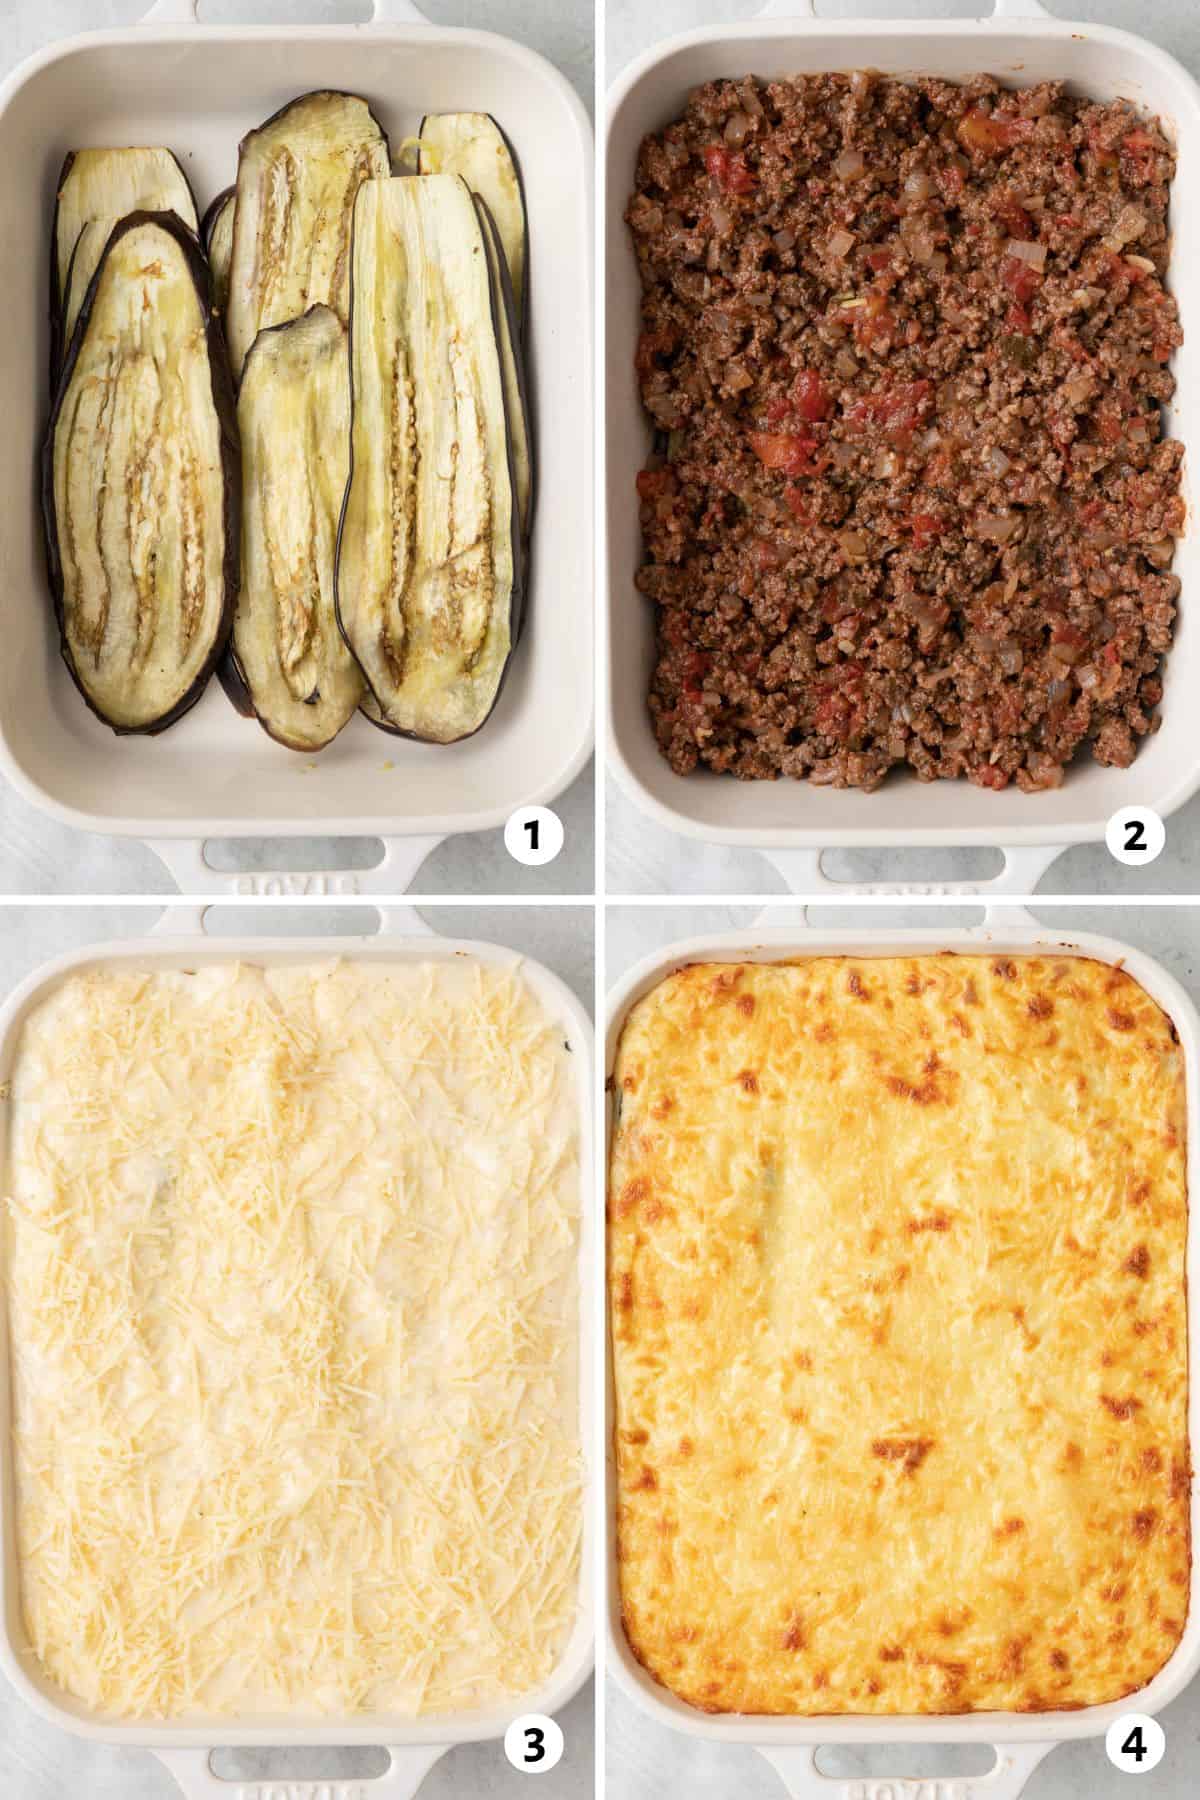 4 image collage assembling recipe in a rectangle baking dish: 1- roasted eggplant plants layered in bottom of dish, 2- meat mixture spread evenly over top, 3- after another layer of eggplant is added with bechamel over top and parmesan cheese added before baking, 4- after baking to show a browned cheese topping.